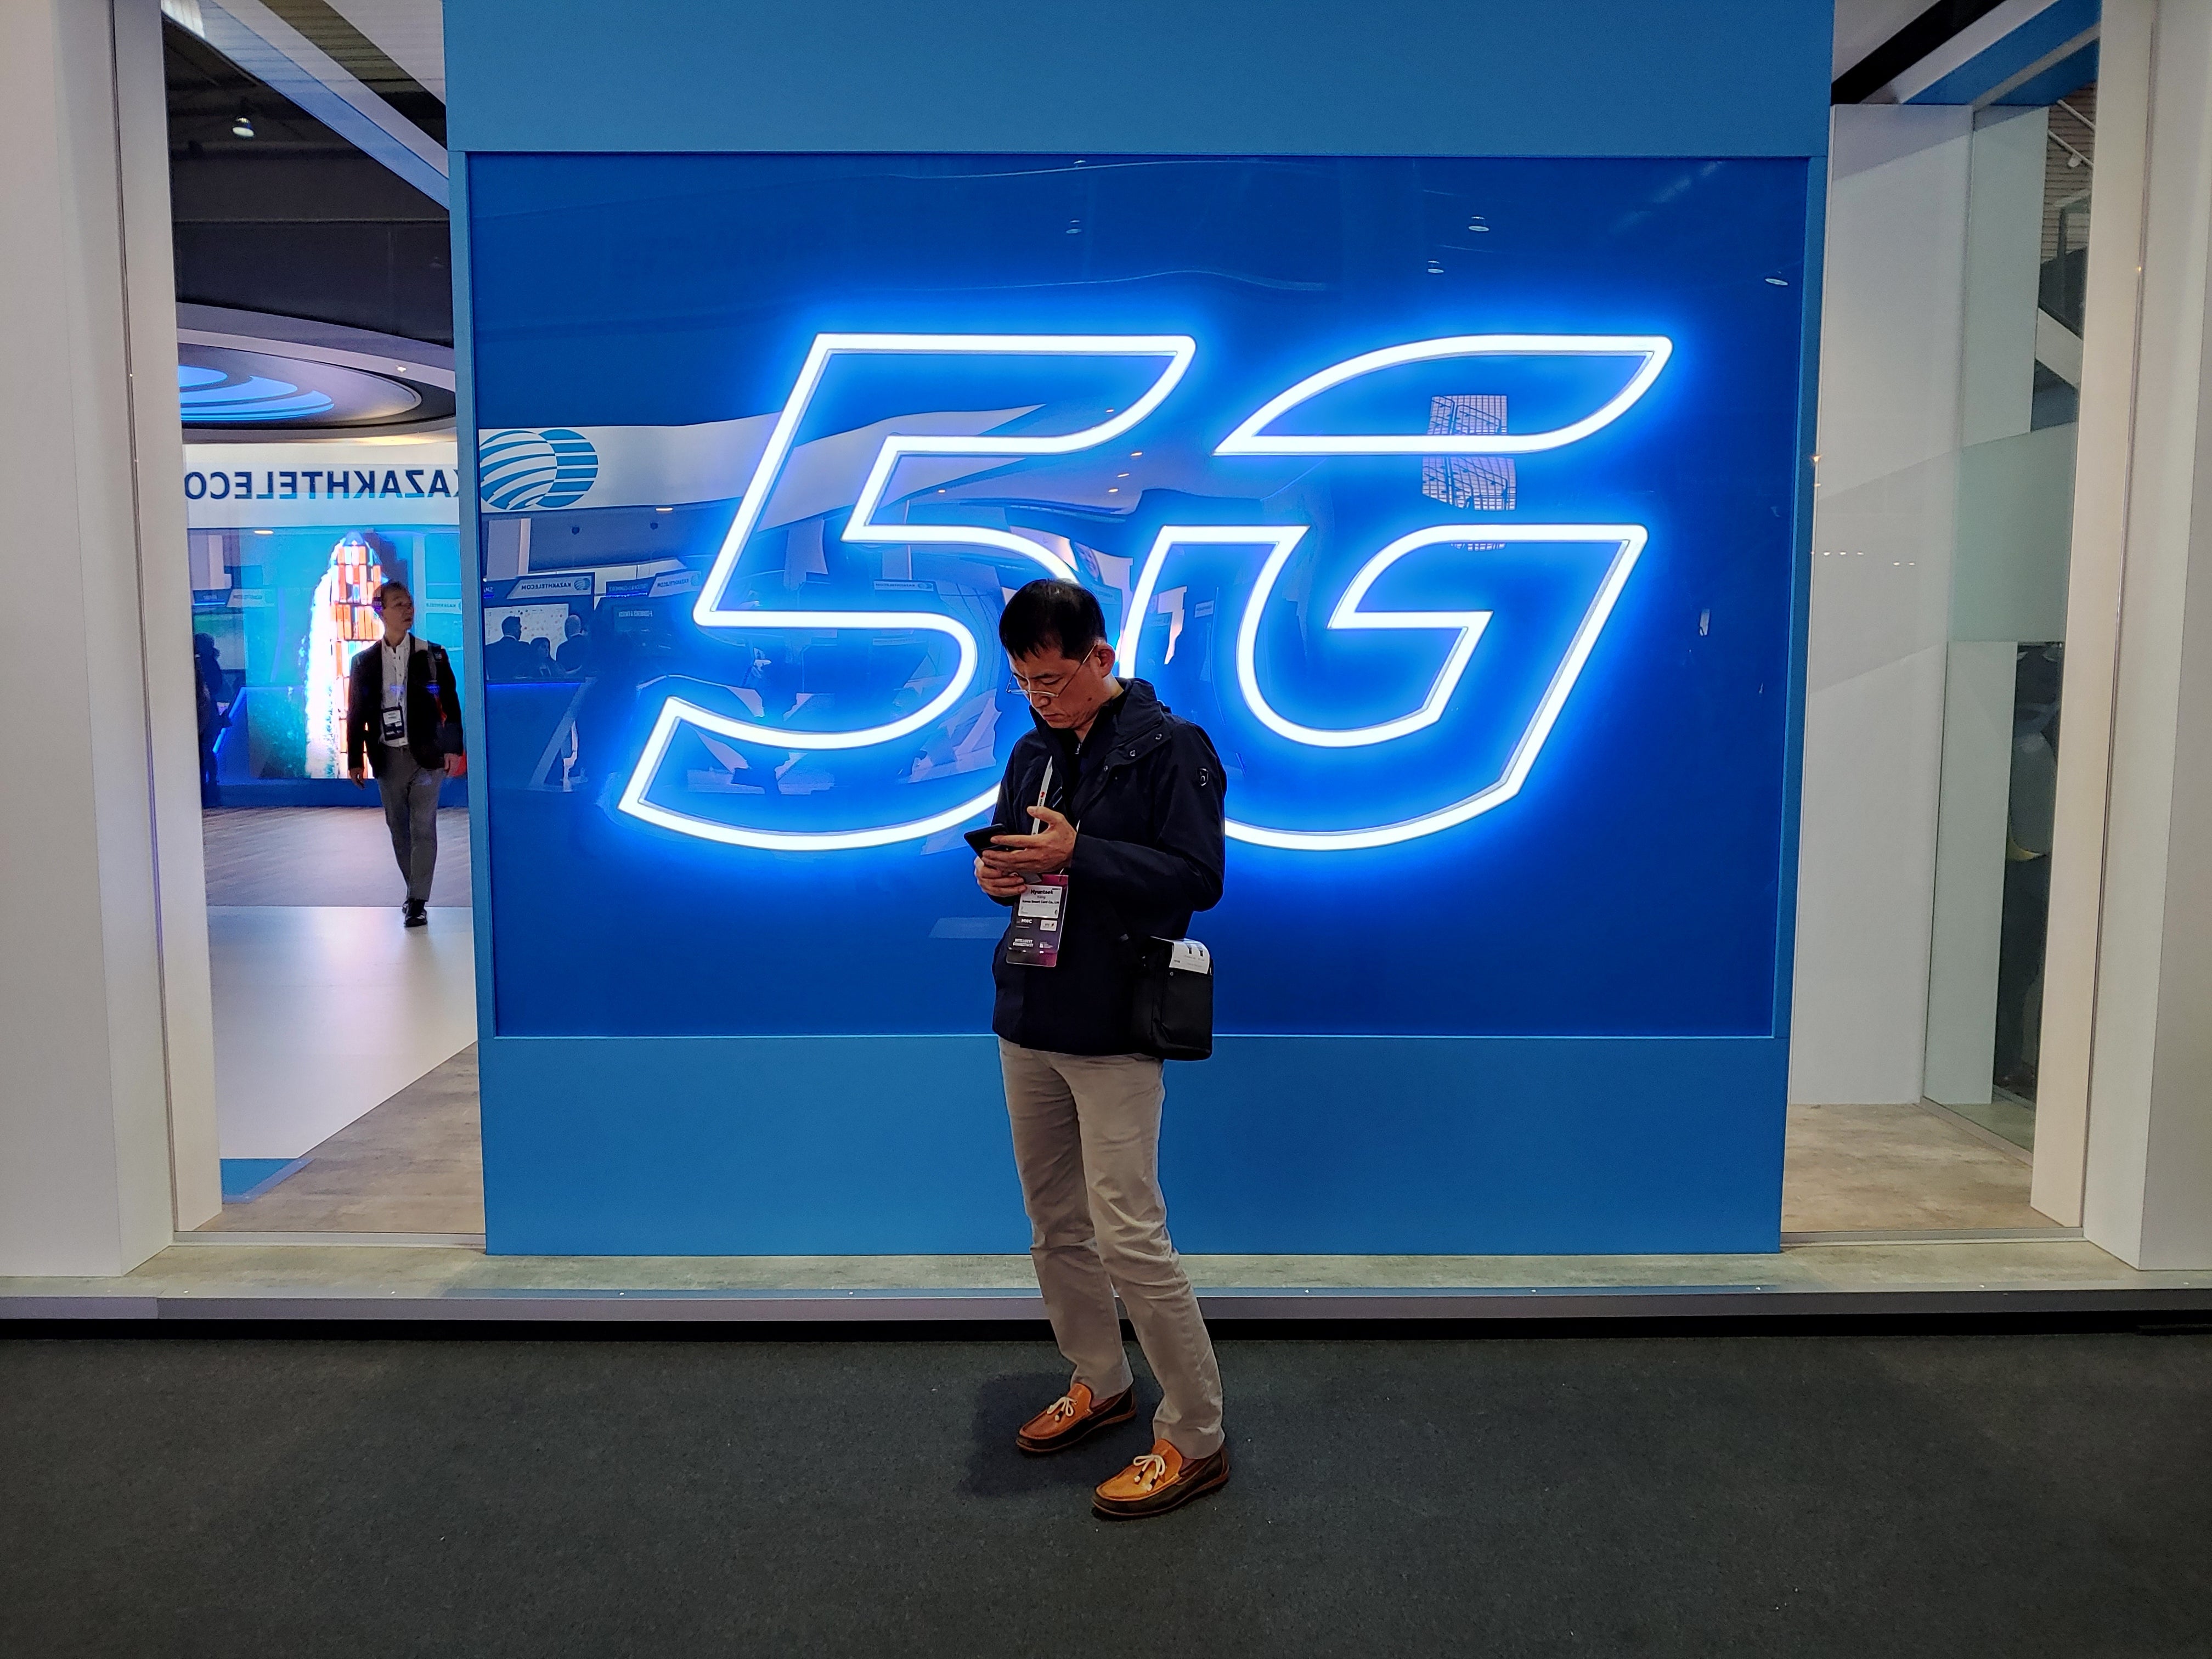 Where is 5G available in the world right now?